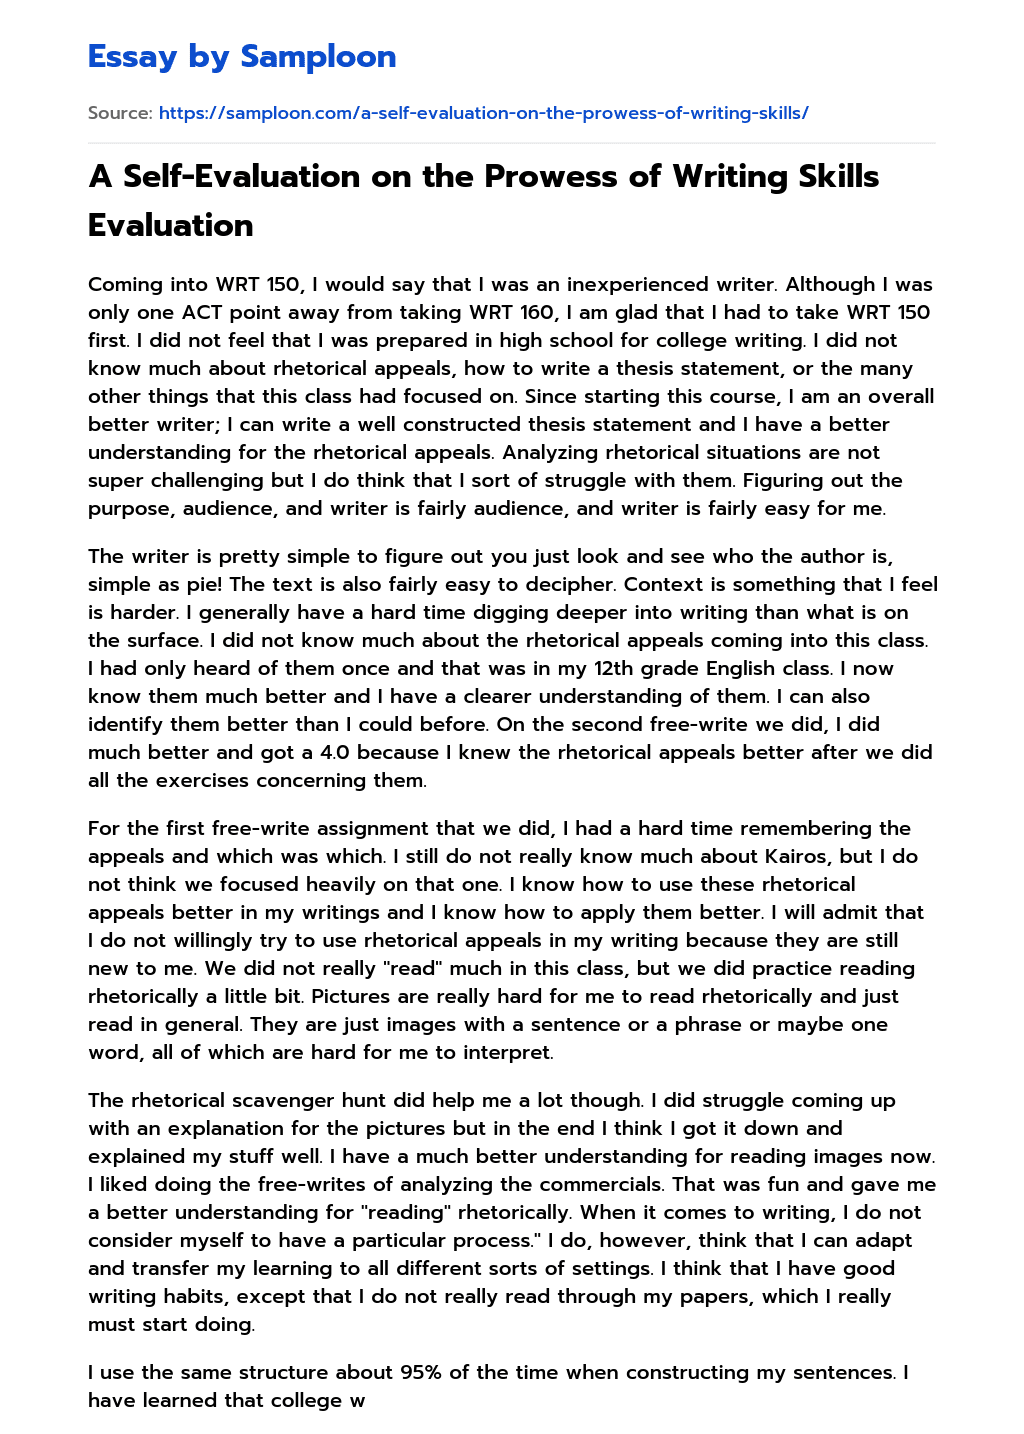 A Self-Evaluation on the Prowess of Writing Skills Evaluation essay